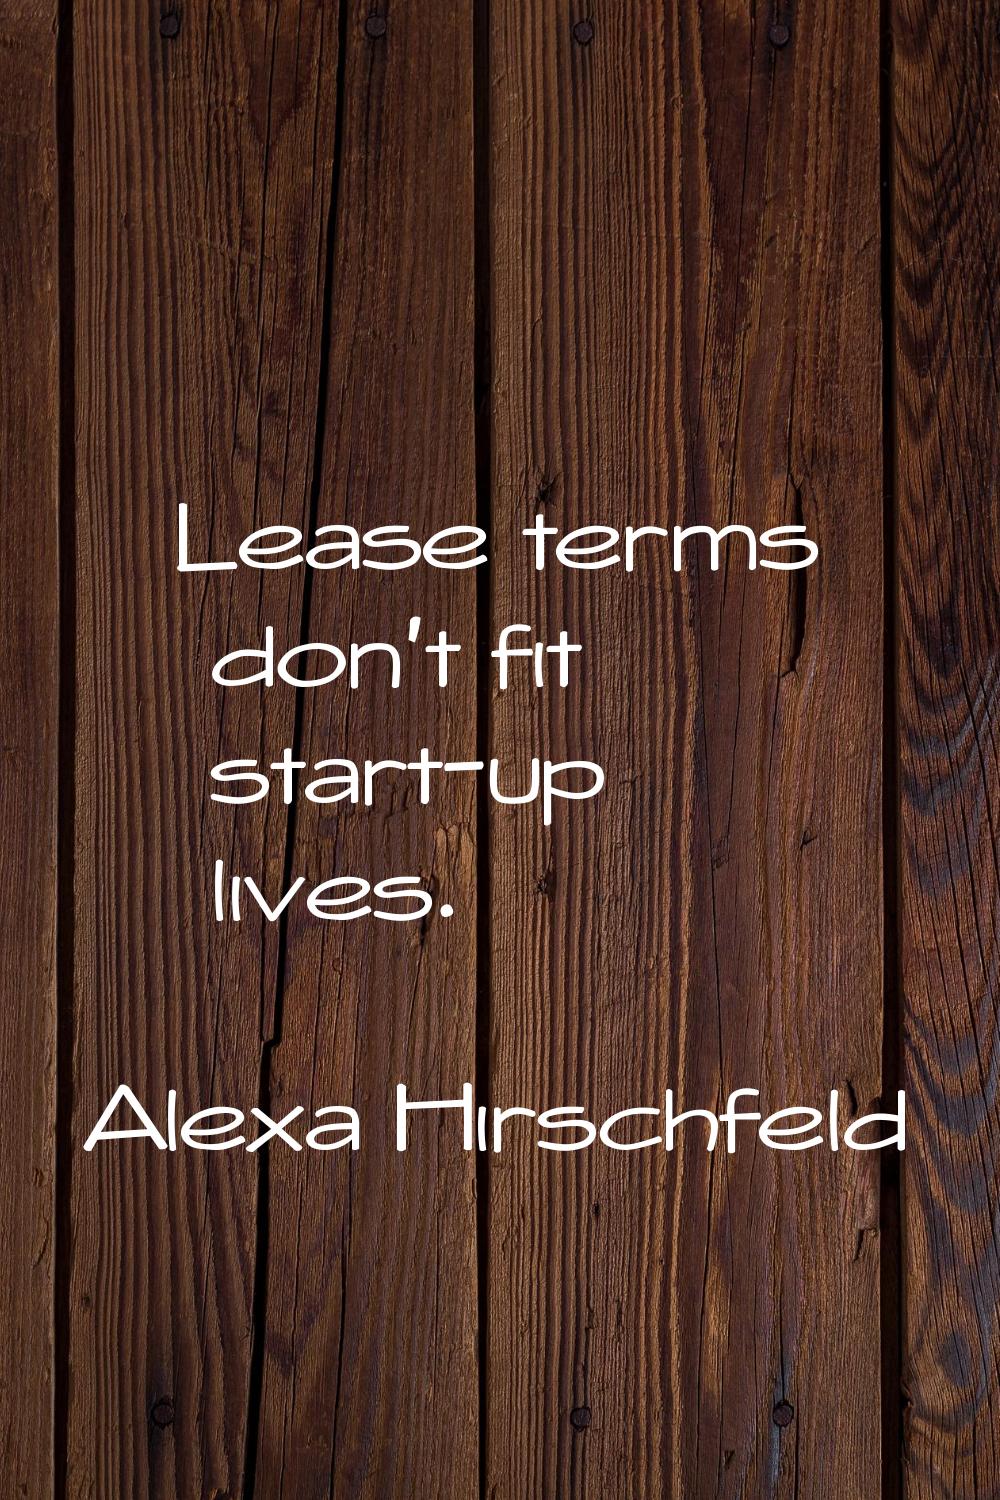 Lease terms don't fit start-up lives.